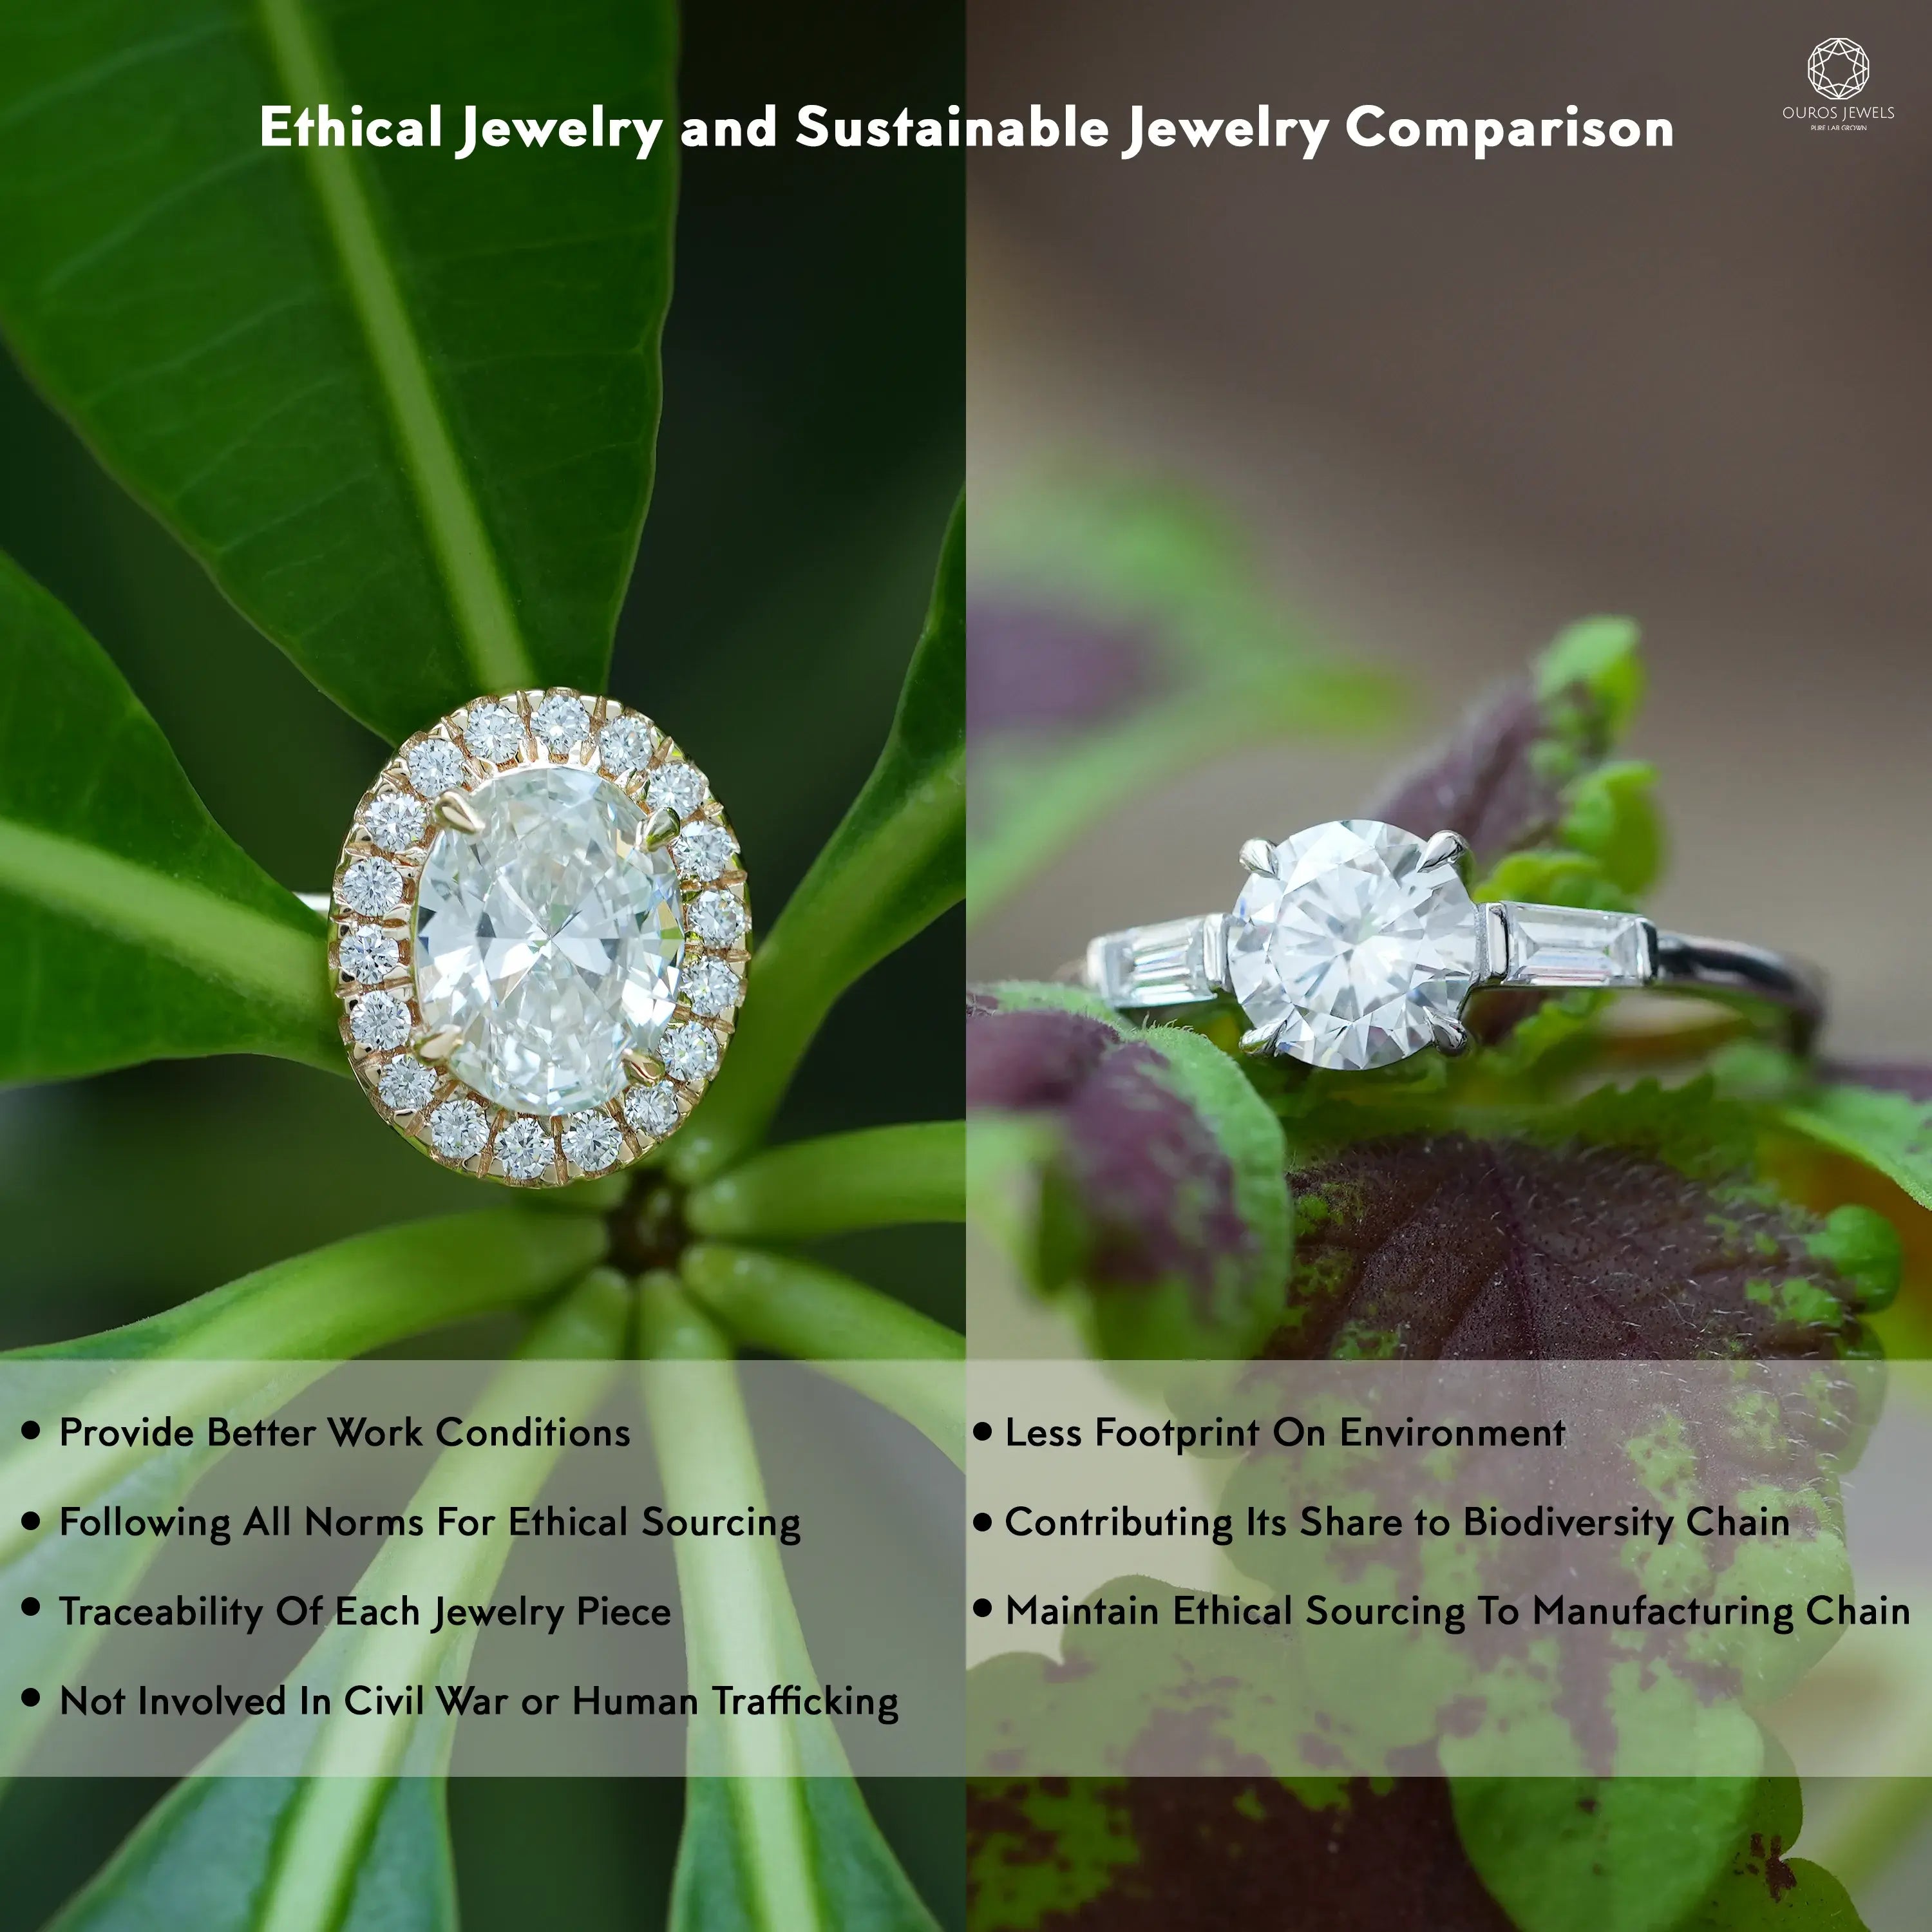 The benefits of ethical and sustainable jewelry with their comparison